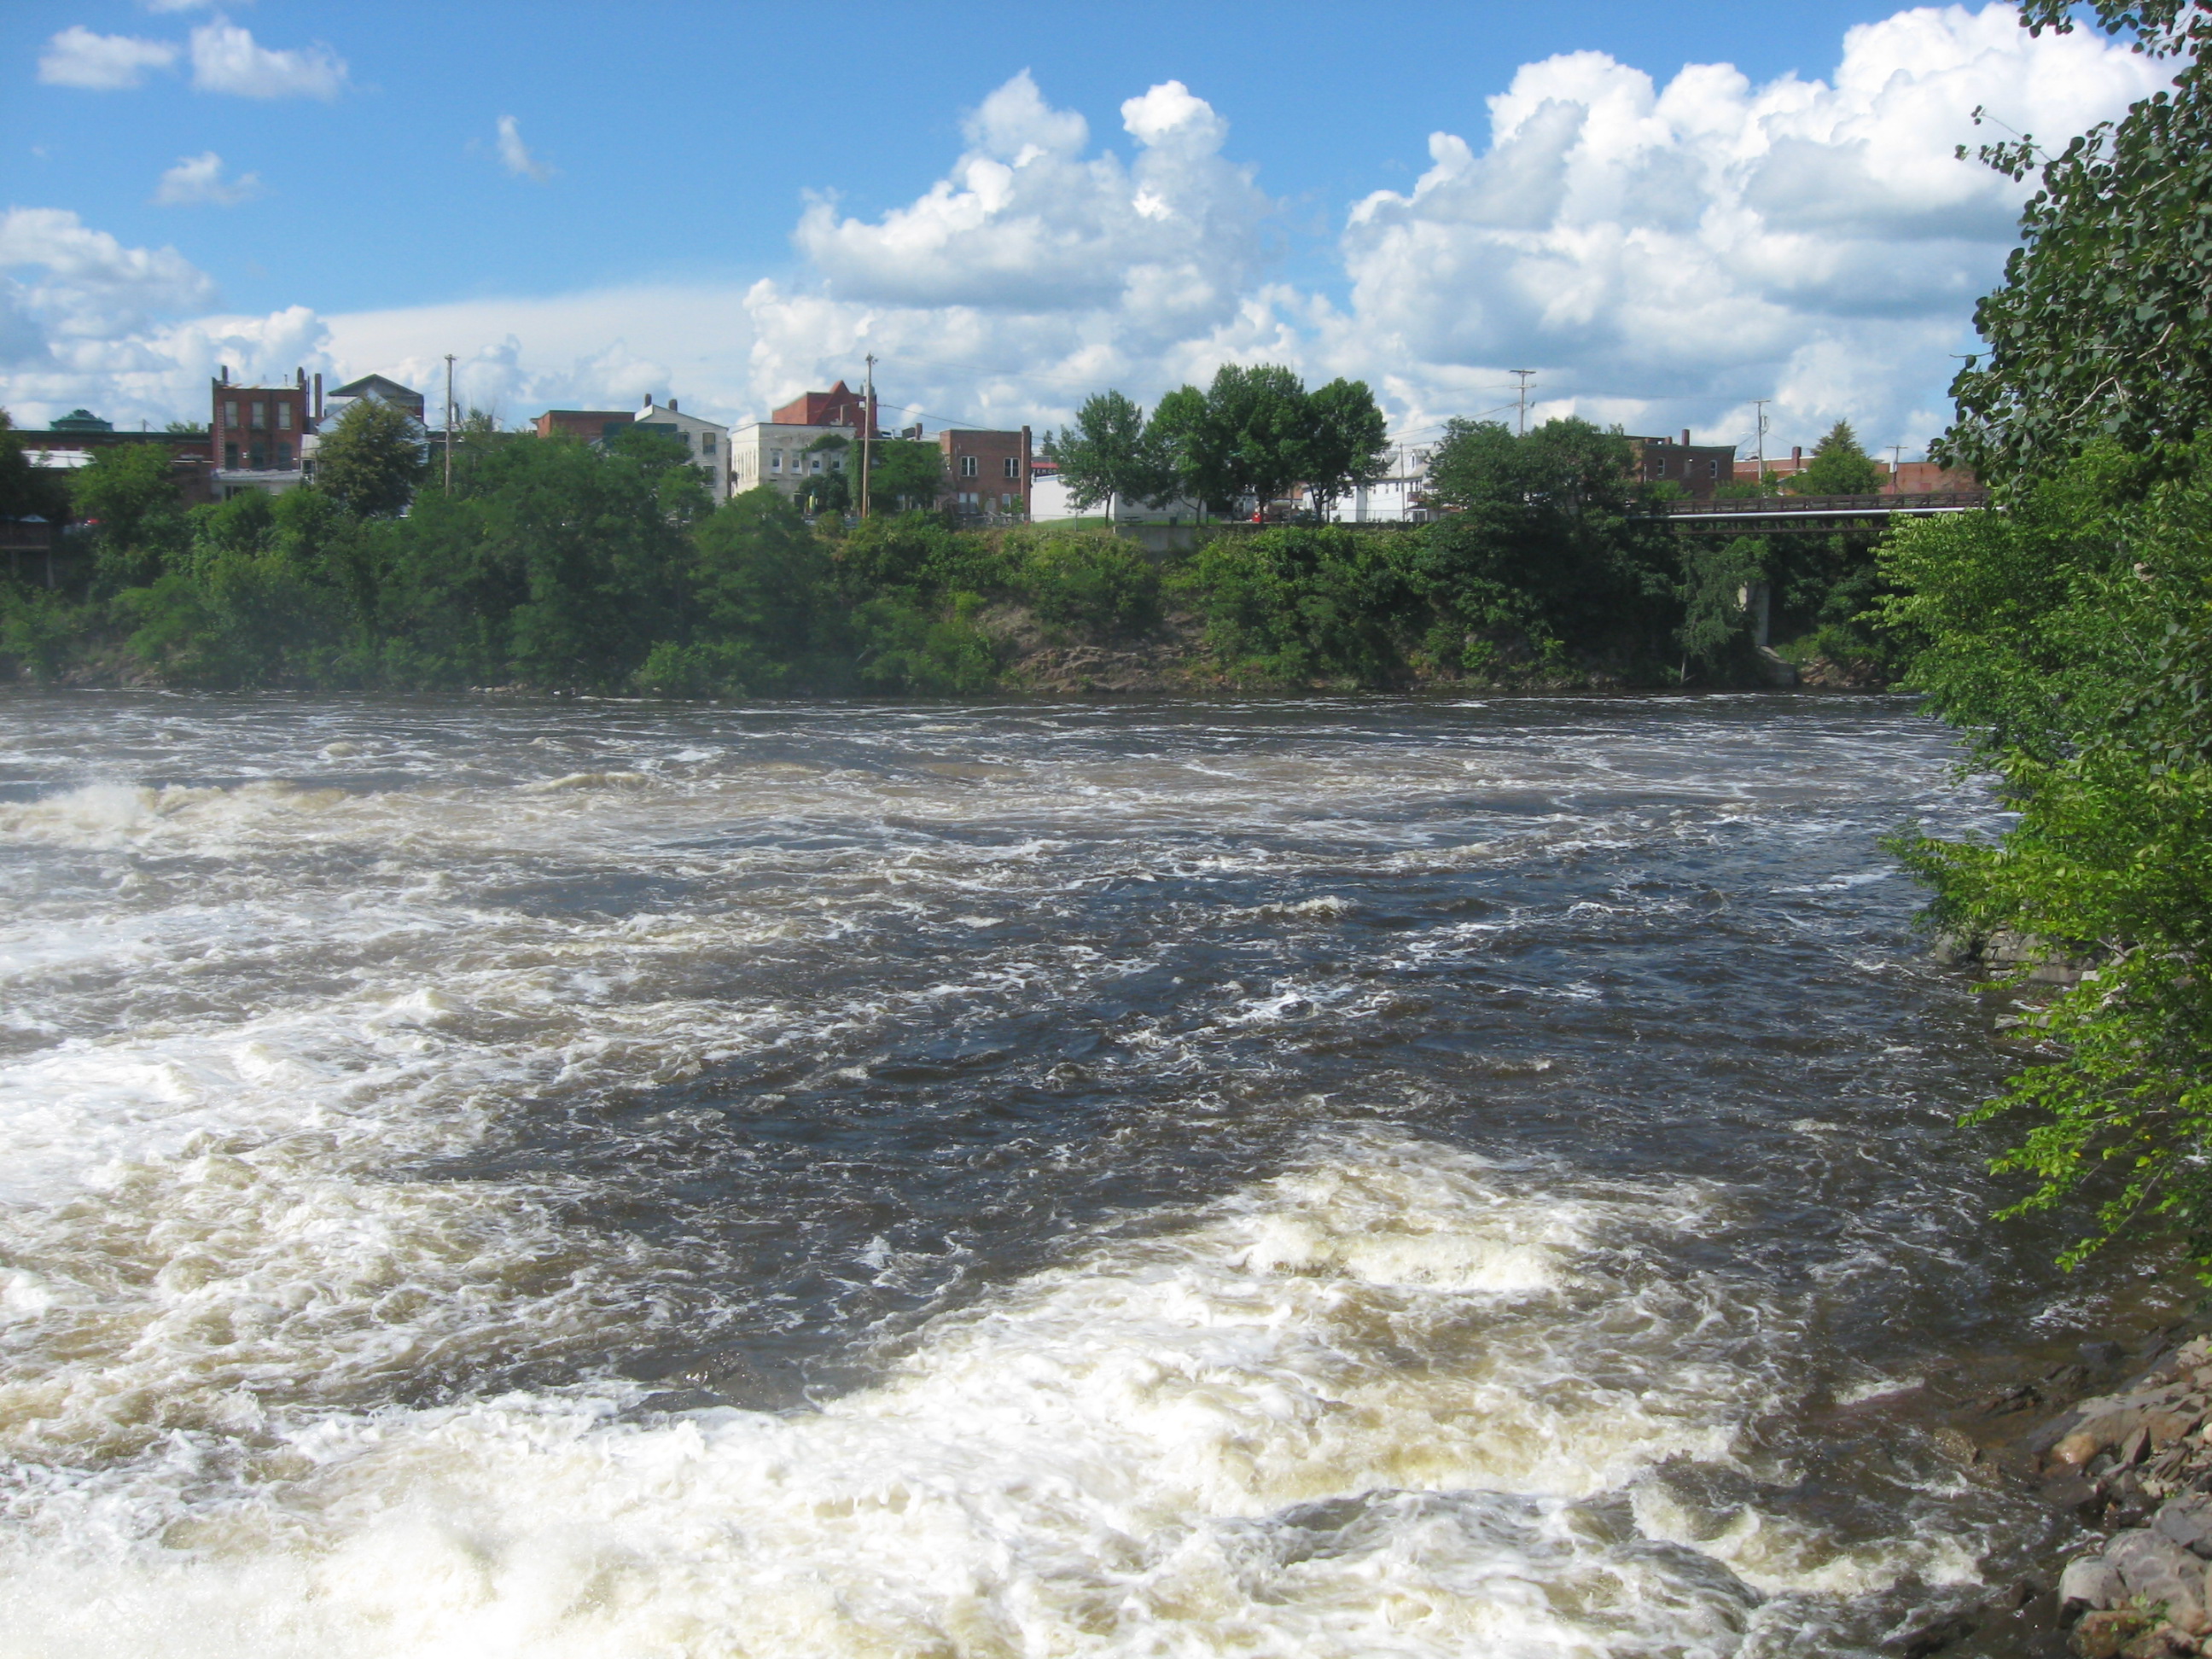 Photograph of the Kennebec River at Skowhegan, ME (SKOM1) looking downstream